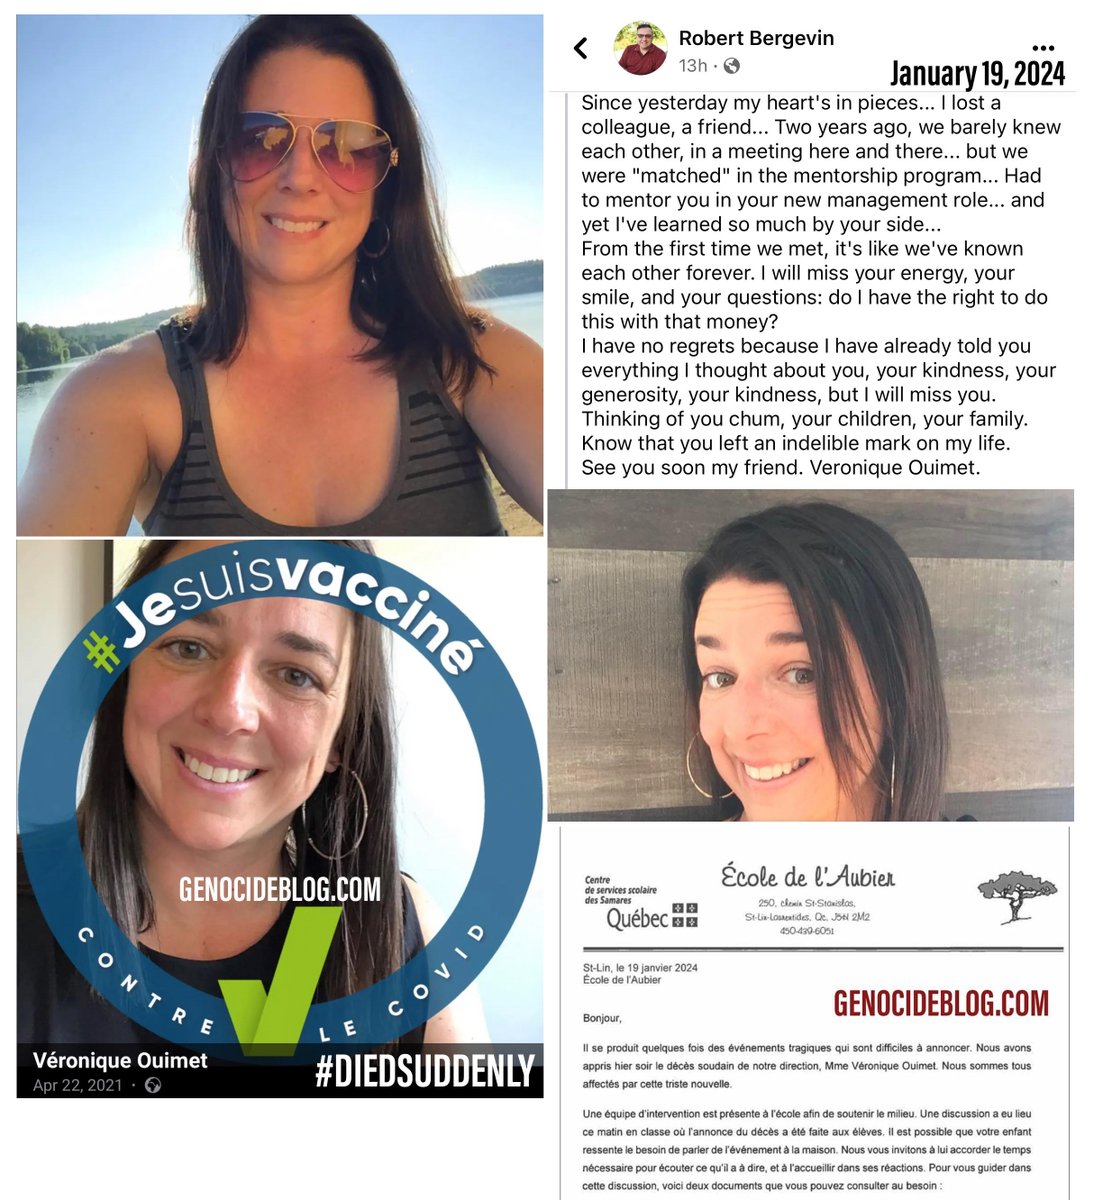 Quebec, Canada - 35 year old Veronique Ouimet worked as a manager at a French School in Quebec, Canada.

She died suddenly on Jan.18, 2024.

Apr.2021: 'Je suis Vaccine contre le COVID'

COVID-19 mRNA Vaccine Sudden deaths are at all time highs, especially in mandated jobs